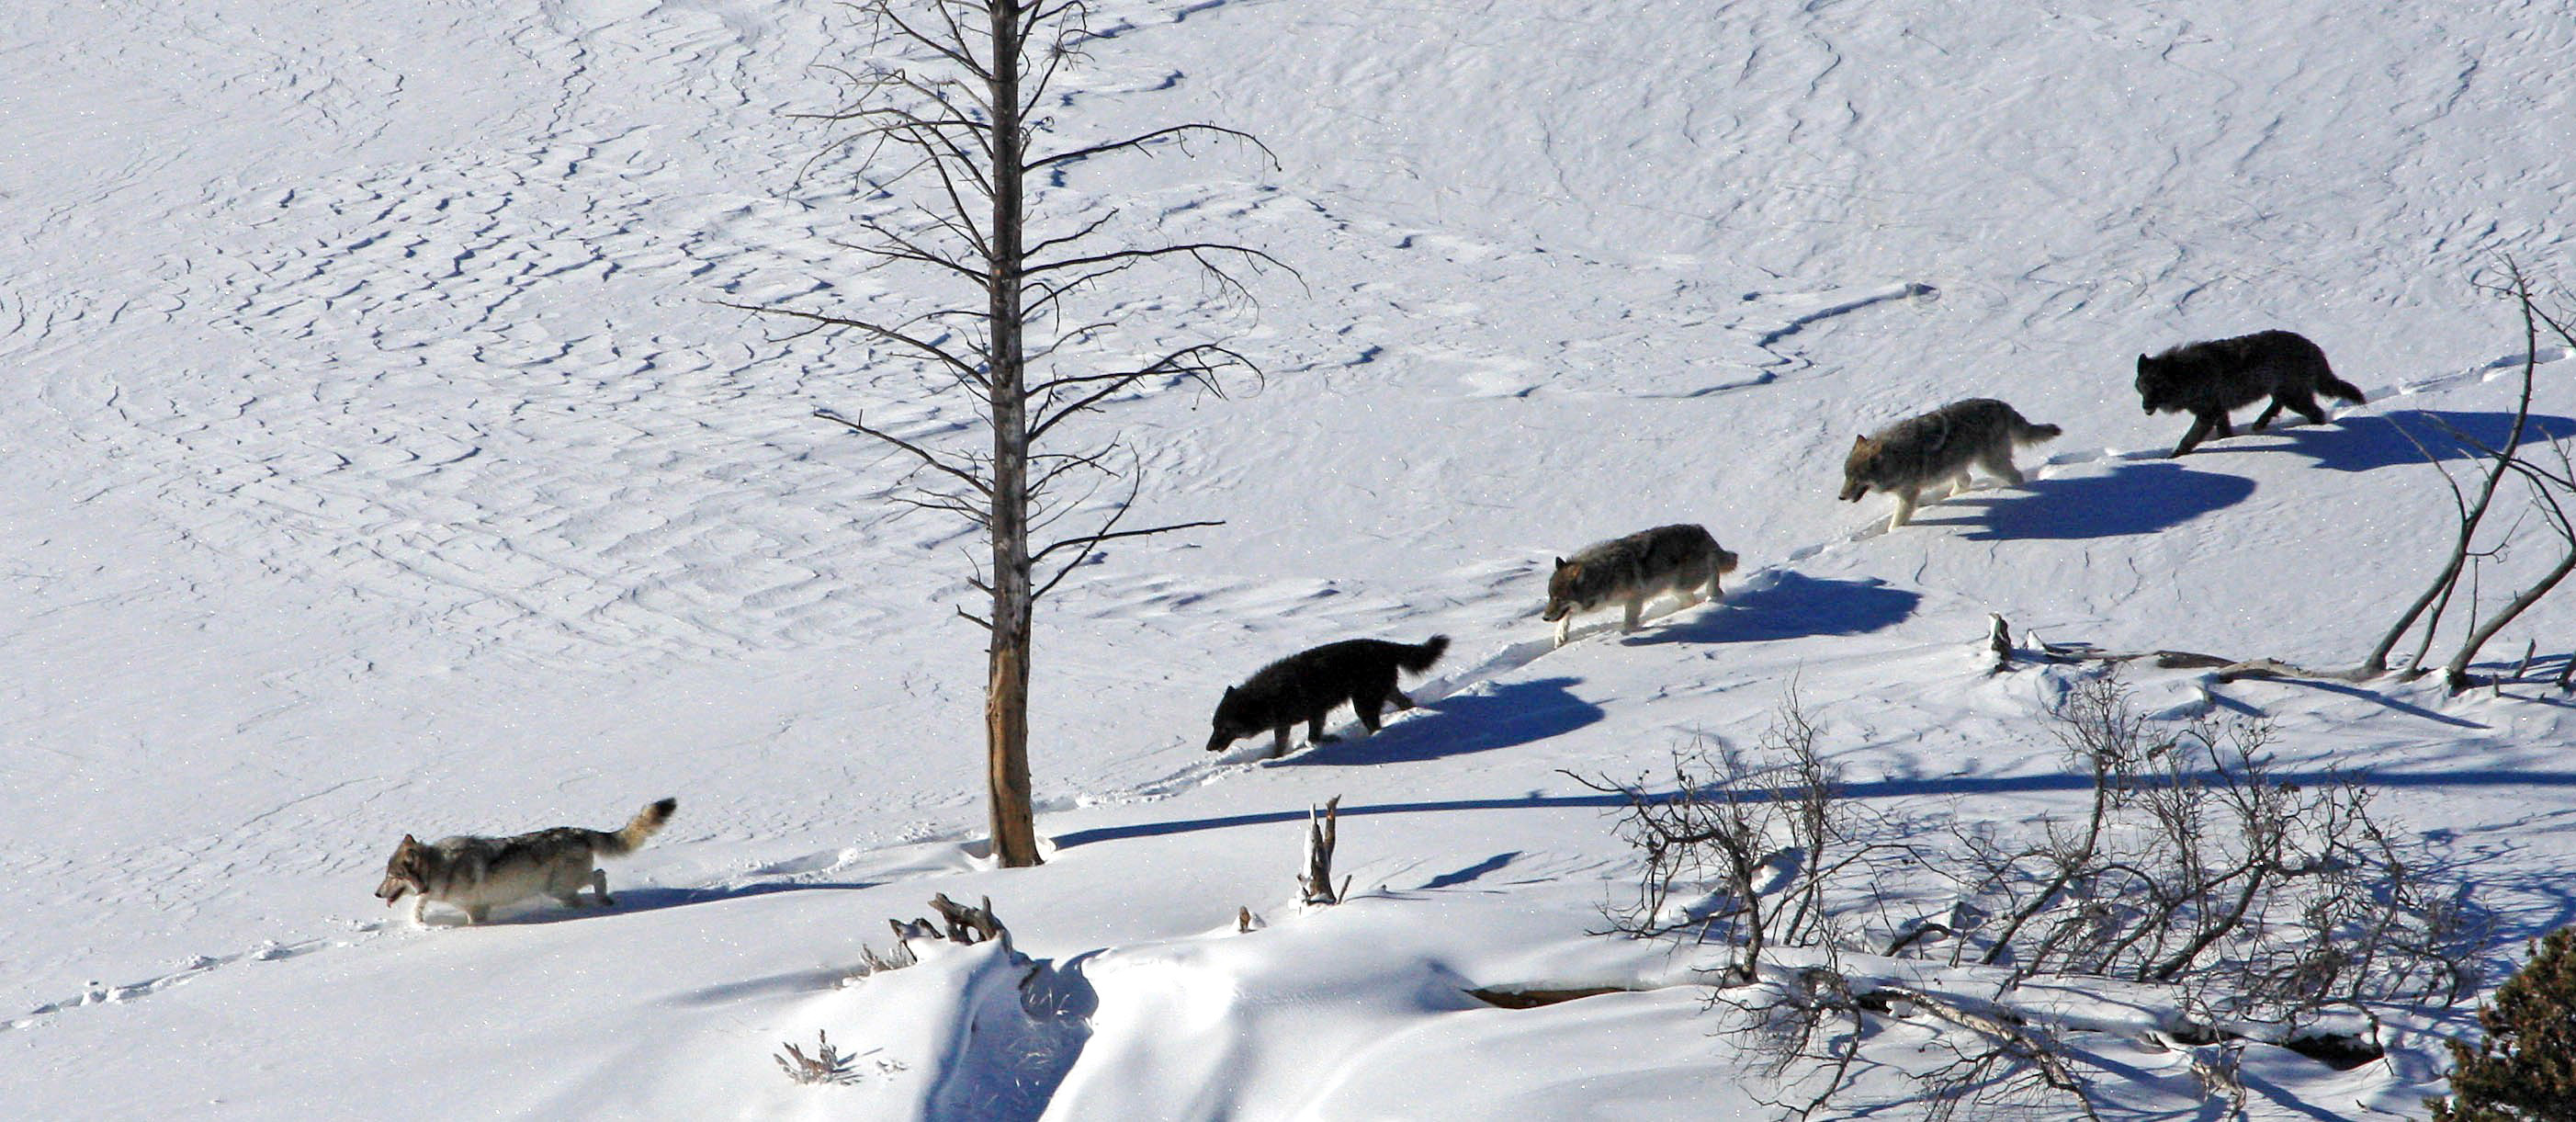 Hungry wolf pack rearranges balance in Yellowstone Park | The Spokesman-Review2804 x 1221